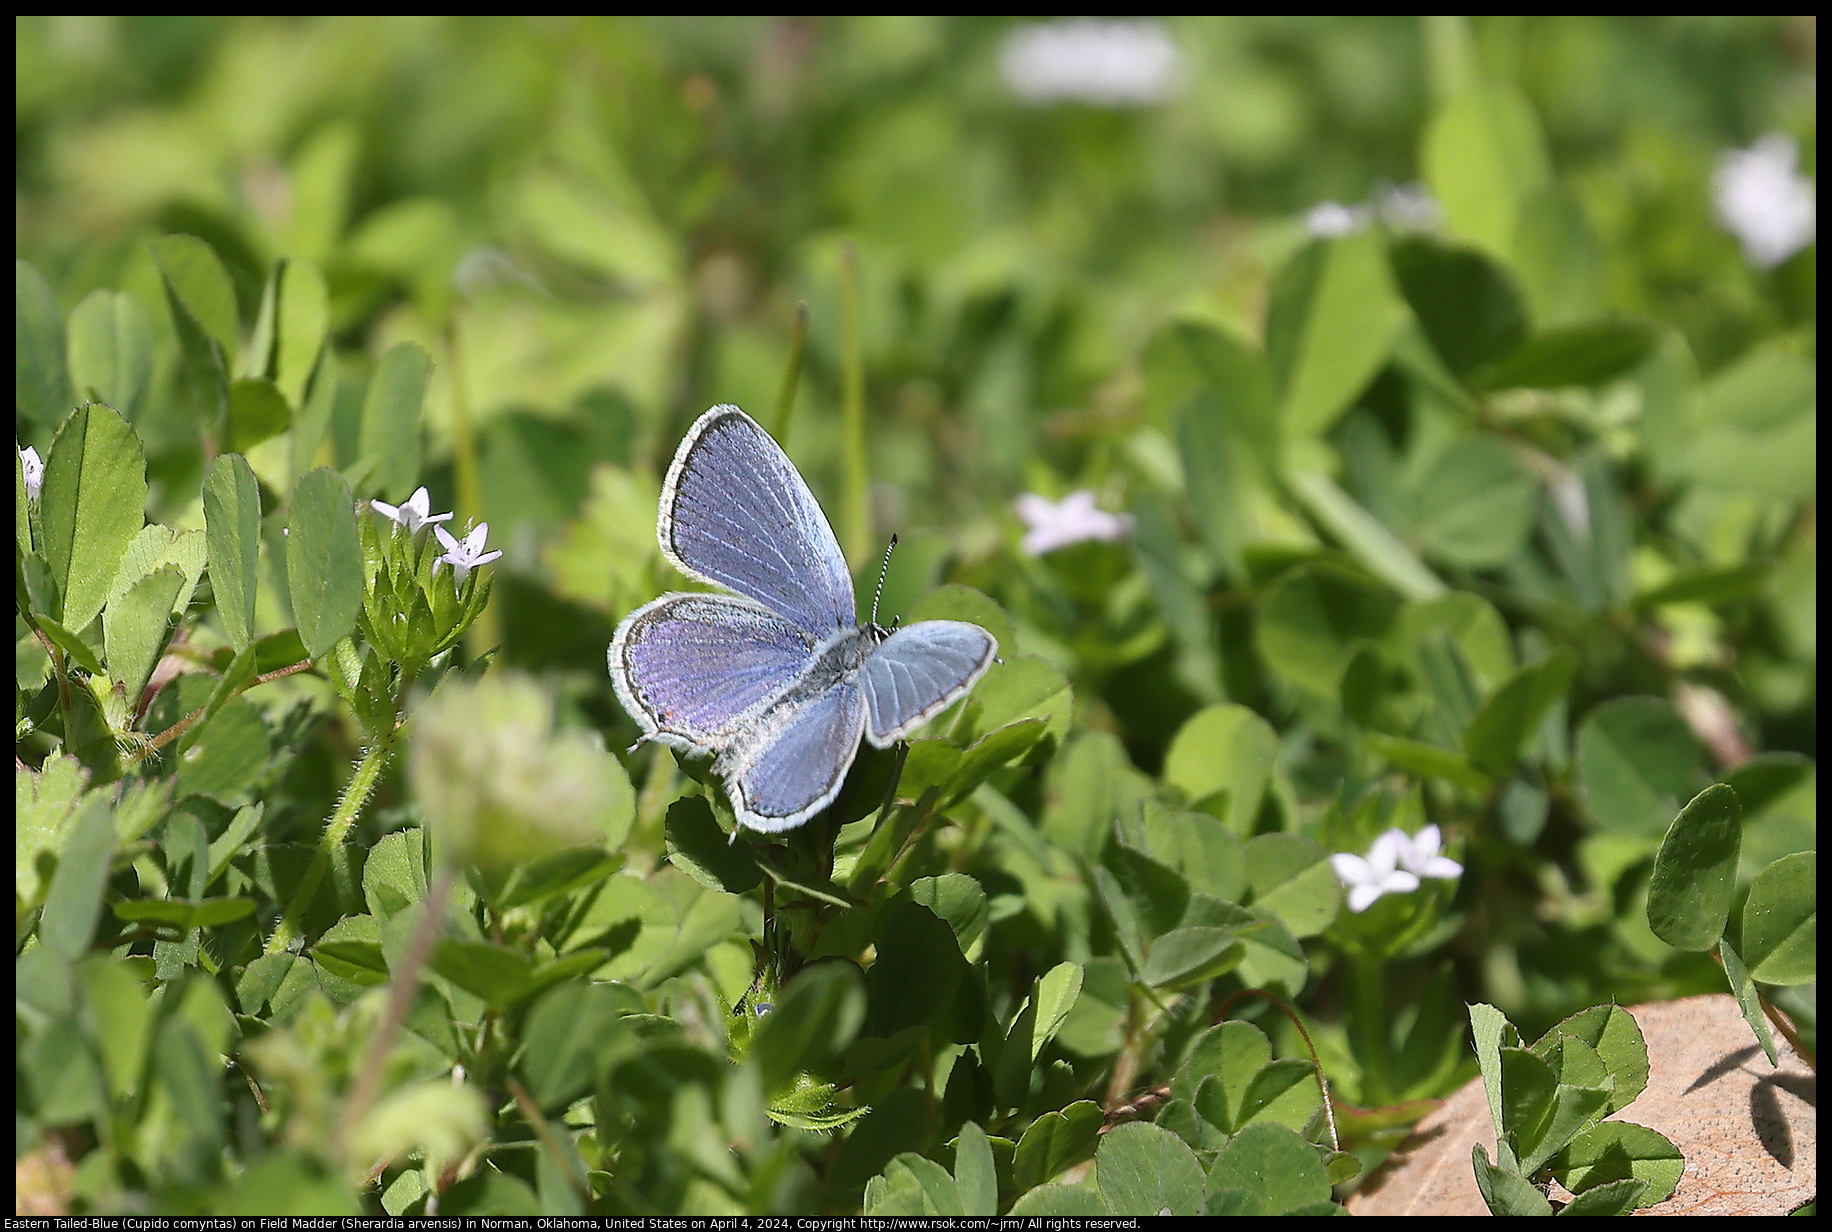 Eastern Tailed-Blue (Cupido comyntas) on Field Madder (Sherardia arvensis) in Norman, Oklahoma, United States on April 4, 2024